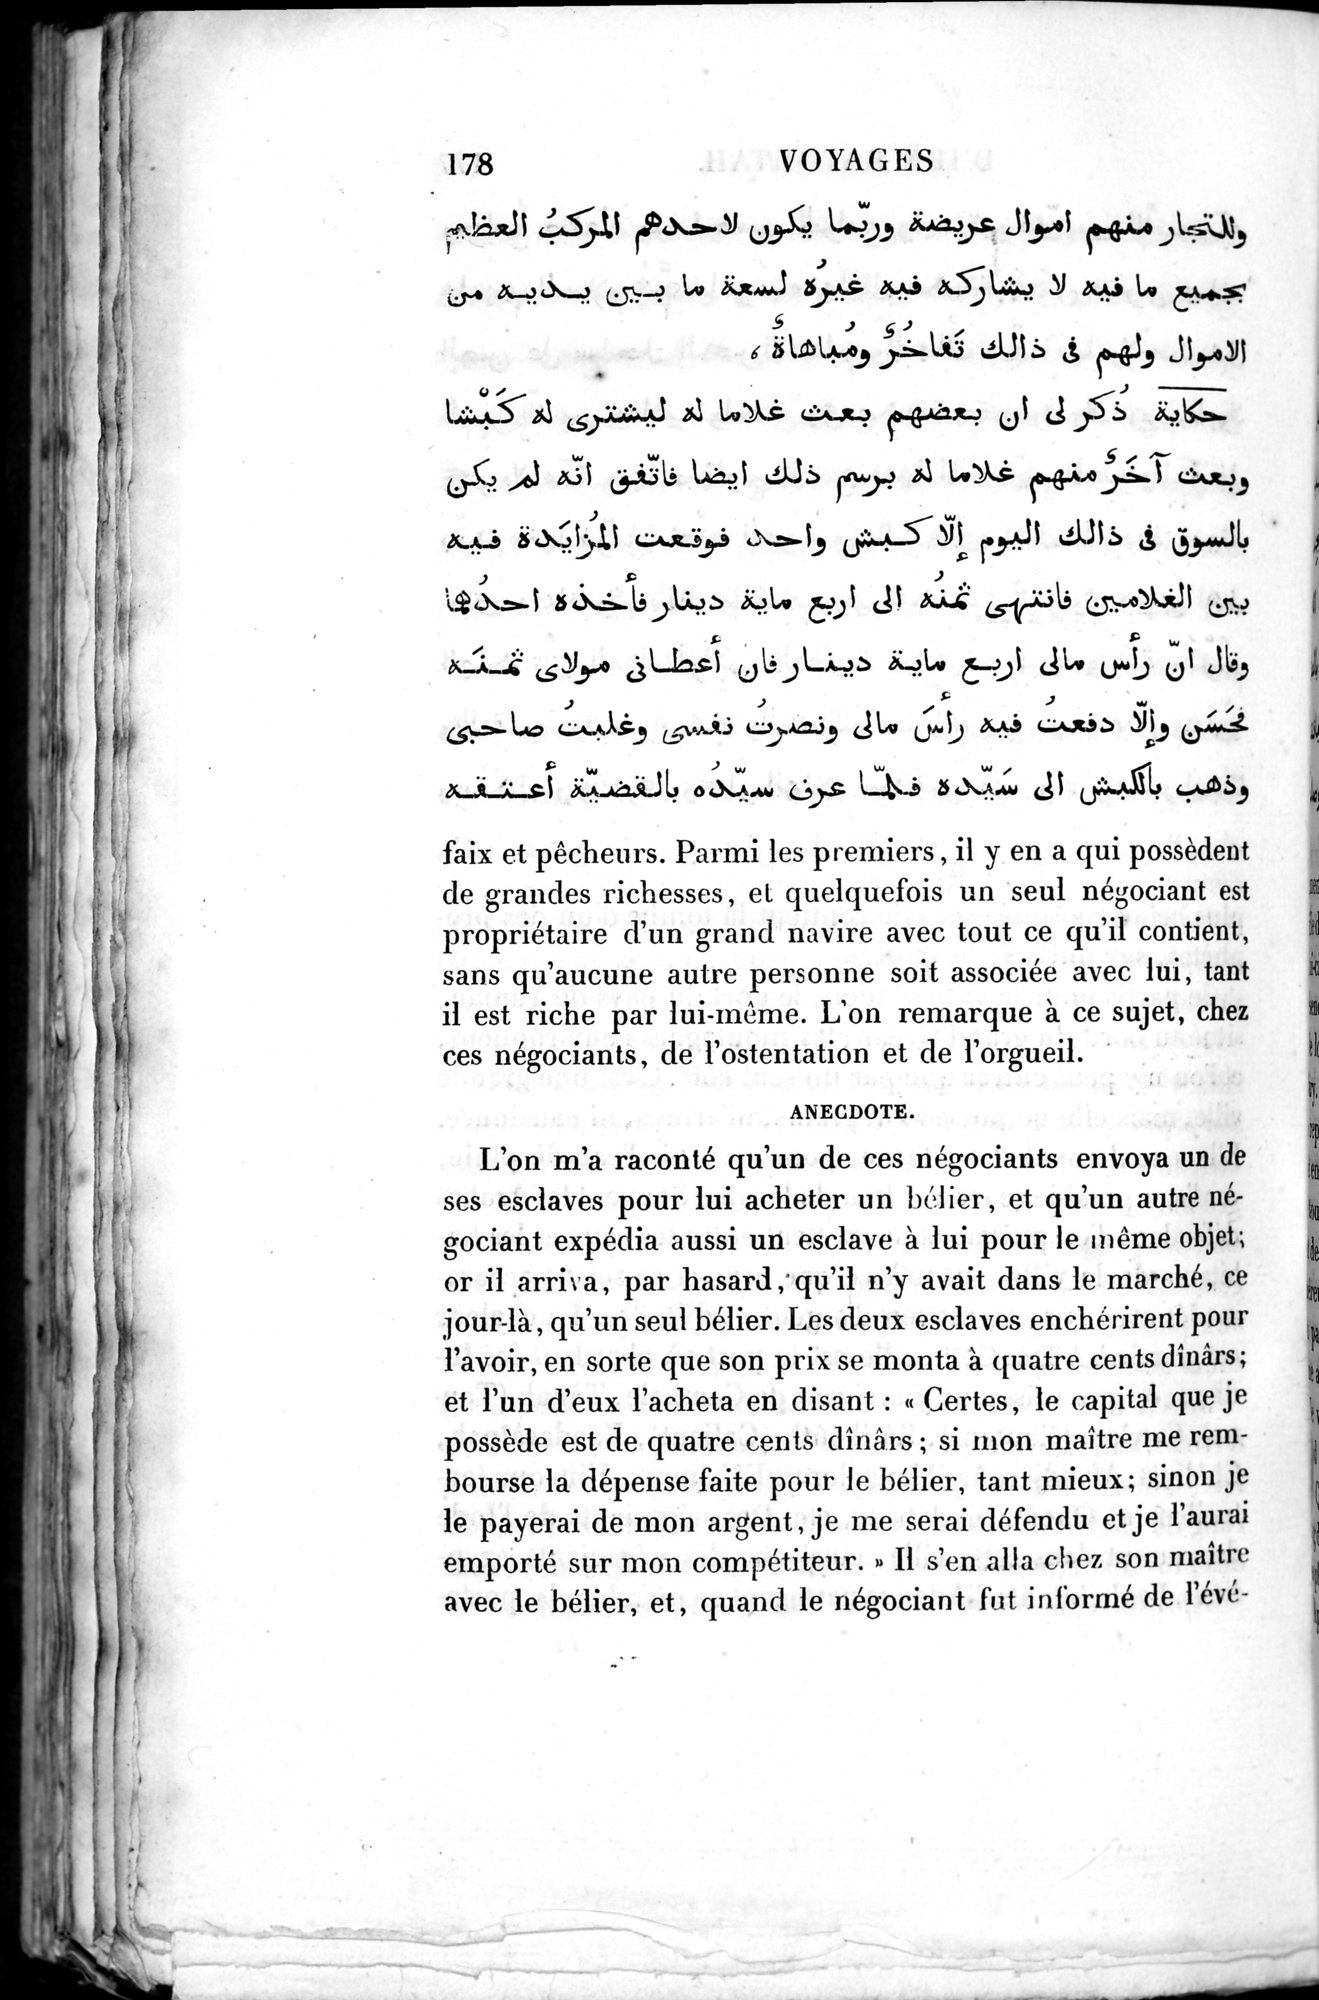 Voyages d'Ibn Batoutah : vol.2 / Page 206 (Grayscale High Resolution Image)